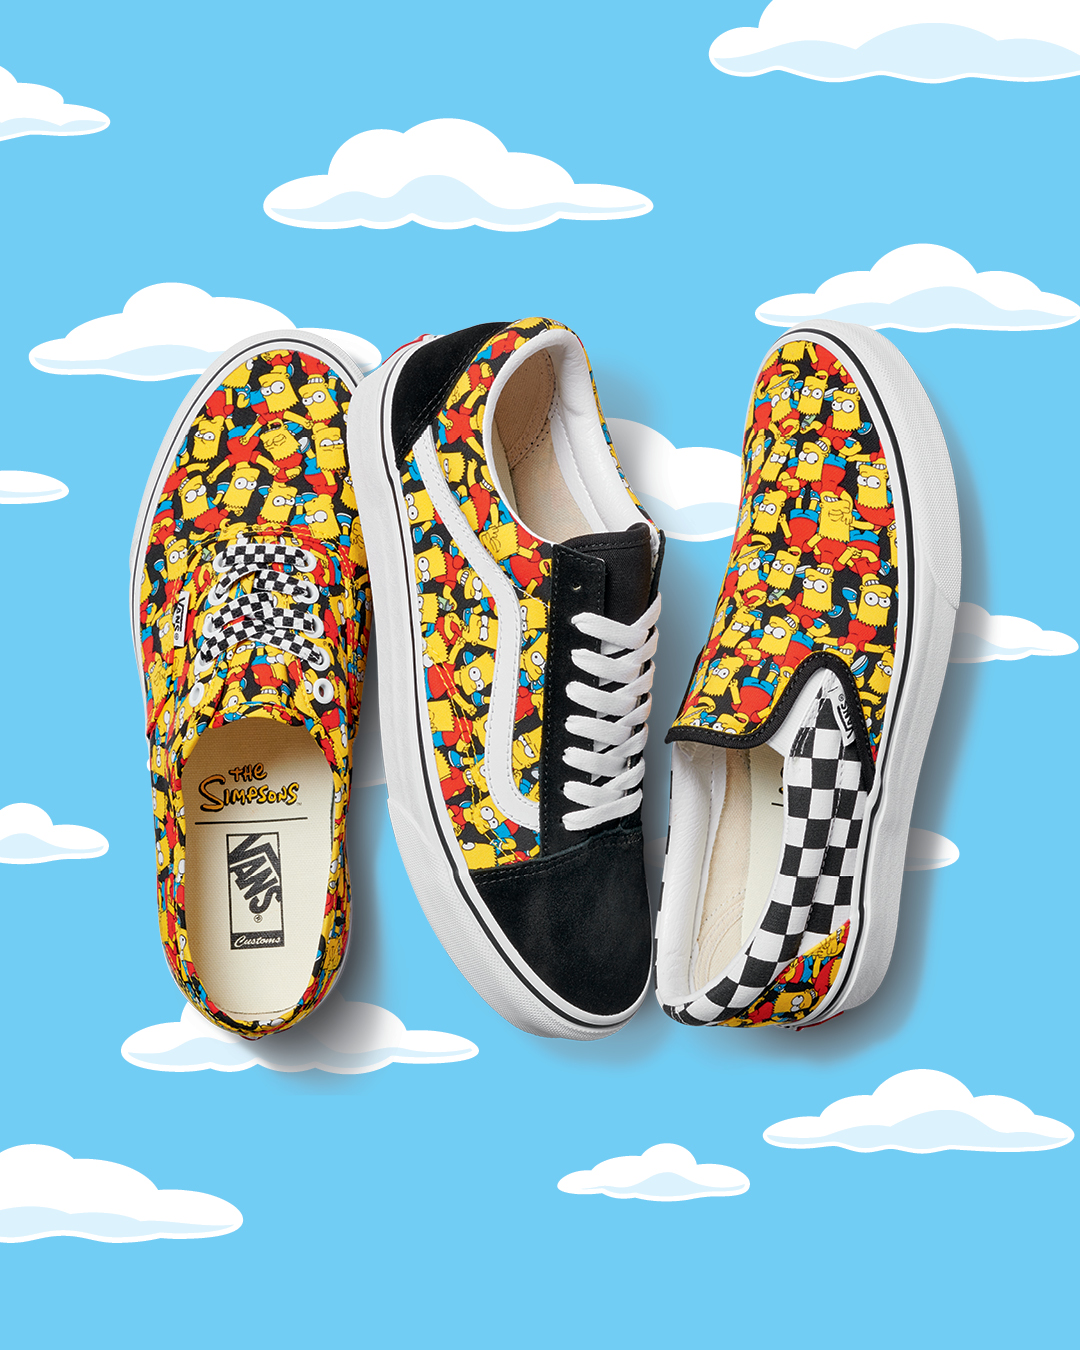 VANS Europe Twitter: "Springfield comes to the Vans Customs Shop with exclusive The Simpsons Vans prints. Start designing our Customs Creator Studio at https://t.co/AABy5QpVfS. https://t.co/mvMHdxpkQ2" / Twitter